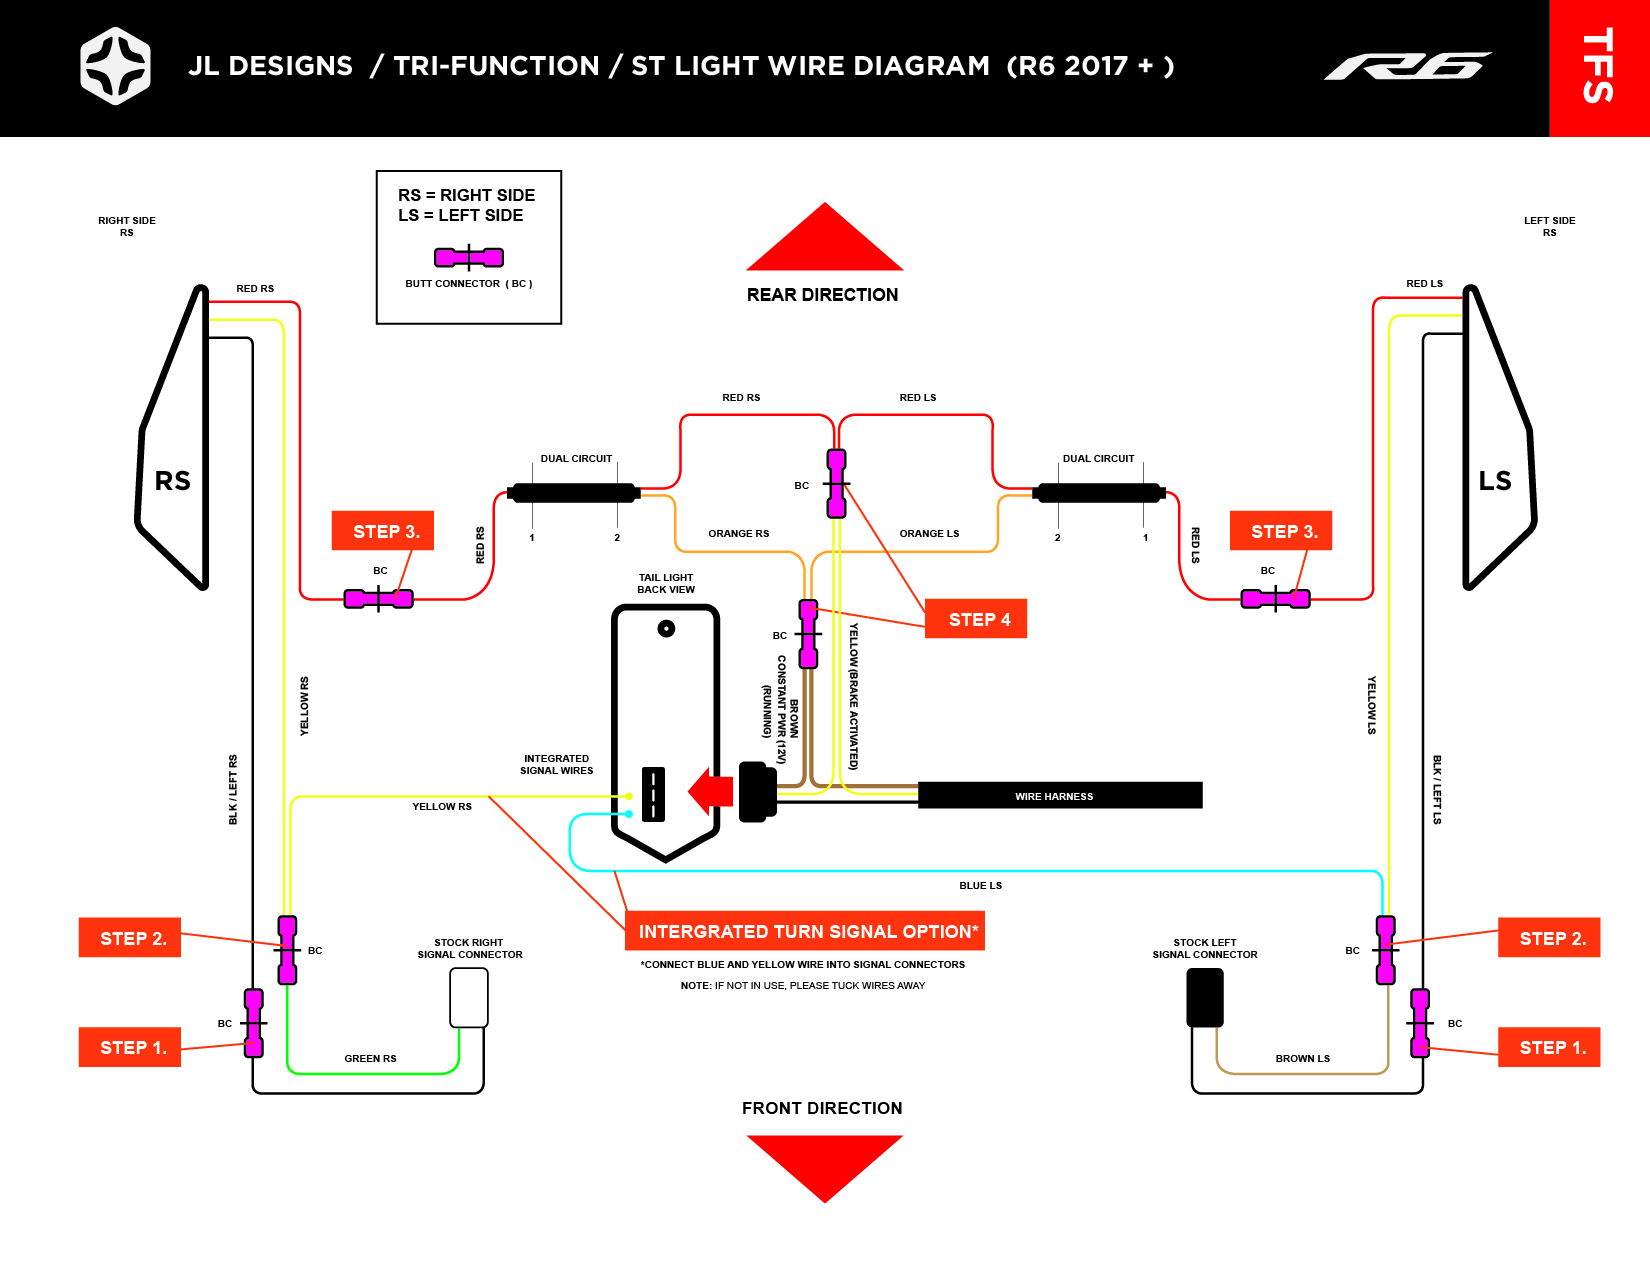 2007 Vw Jetta Left Side Turn Signal Light Color Code Wiring Diagram from images.squarespace-cdn.com